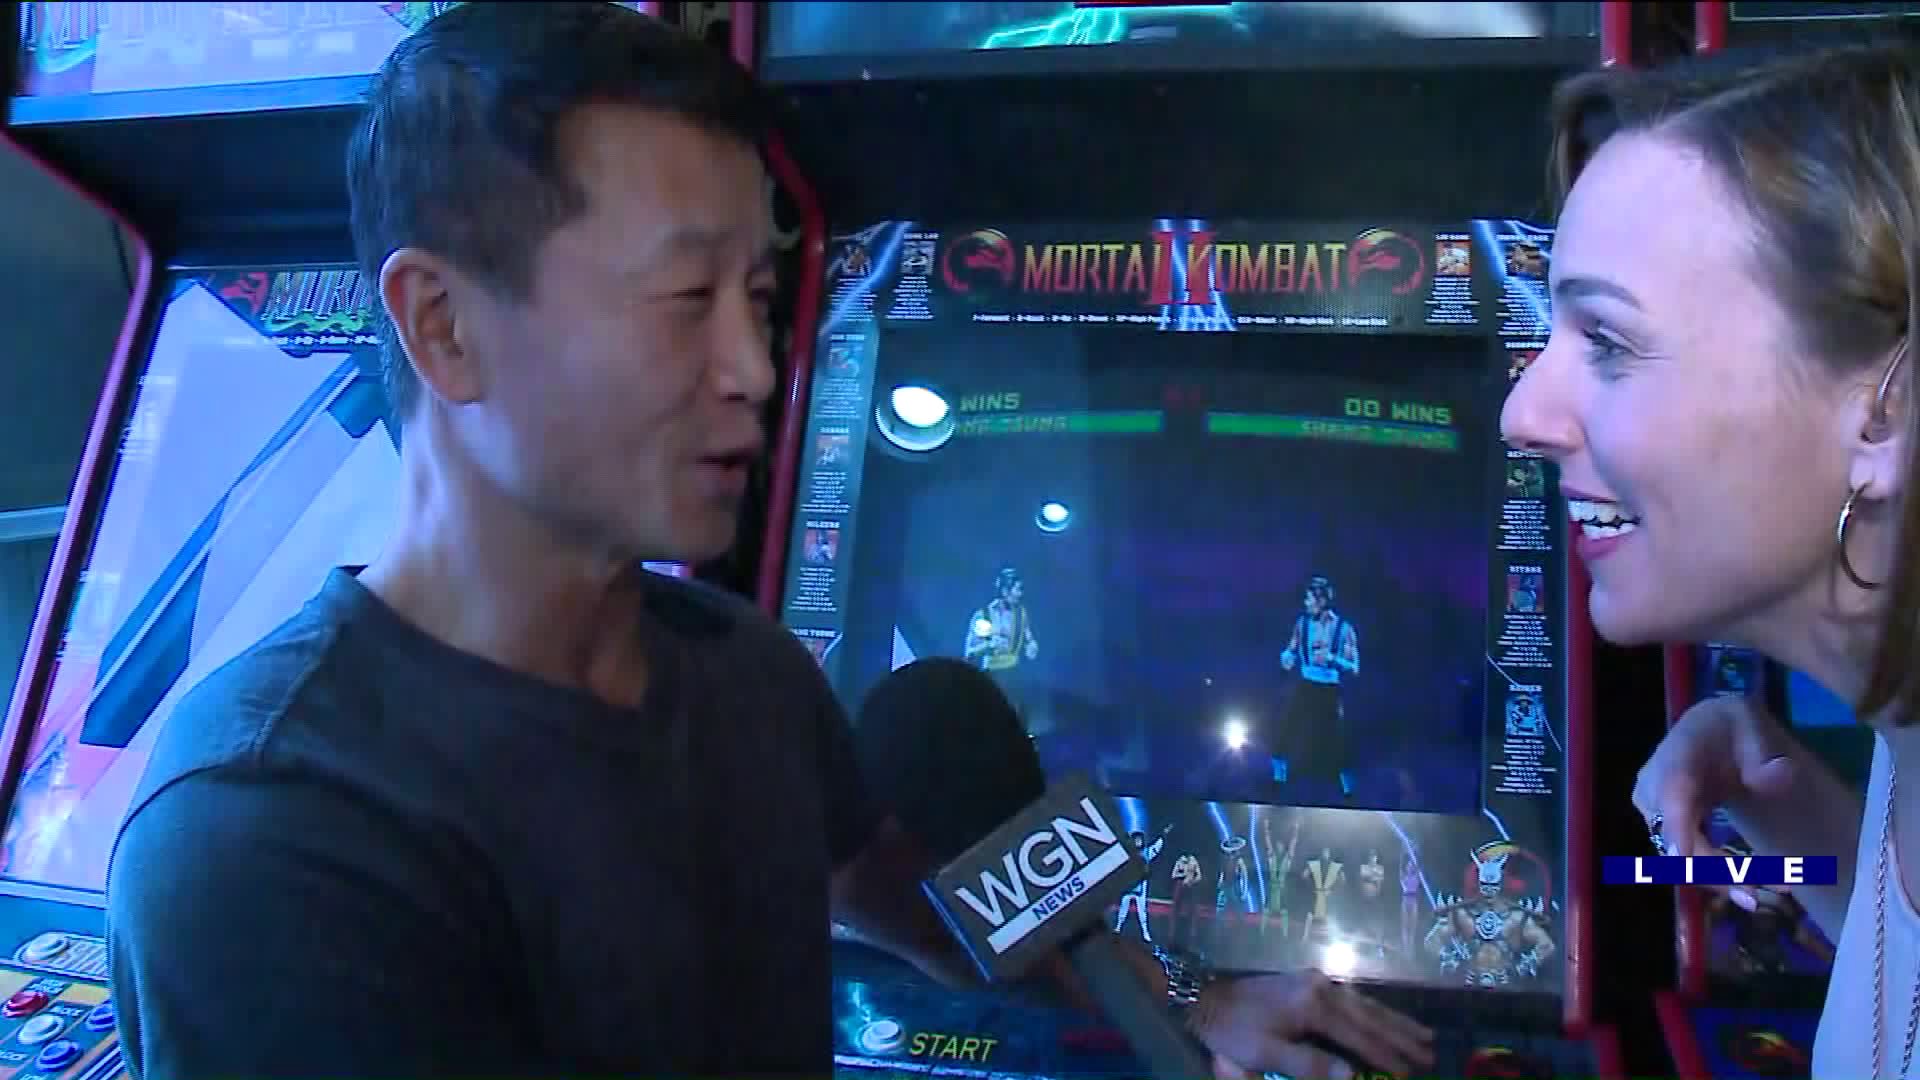 Around Town visits Galloping Ghost Arcade